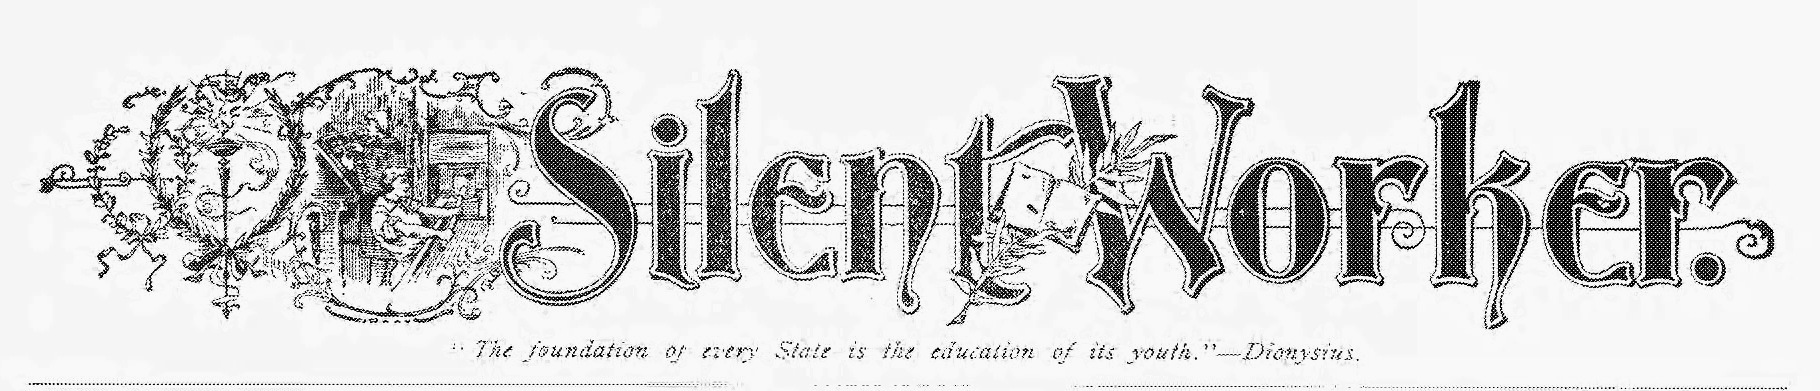 Image showing the words 'Silent Worker' in stylized type, with an illustration of vines and people to the left and the text 'The foundation of every State is the ducation of its youth, Dionysius' underneath